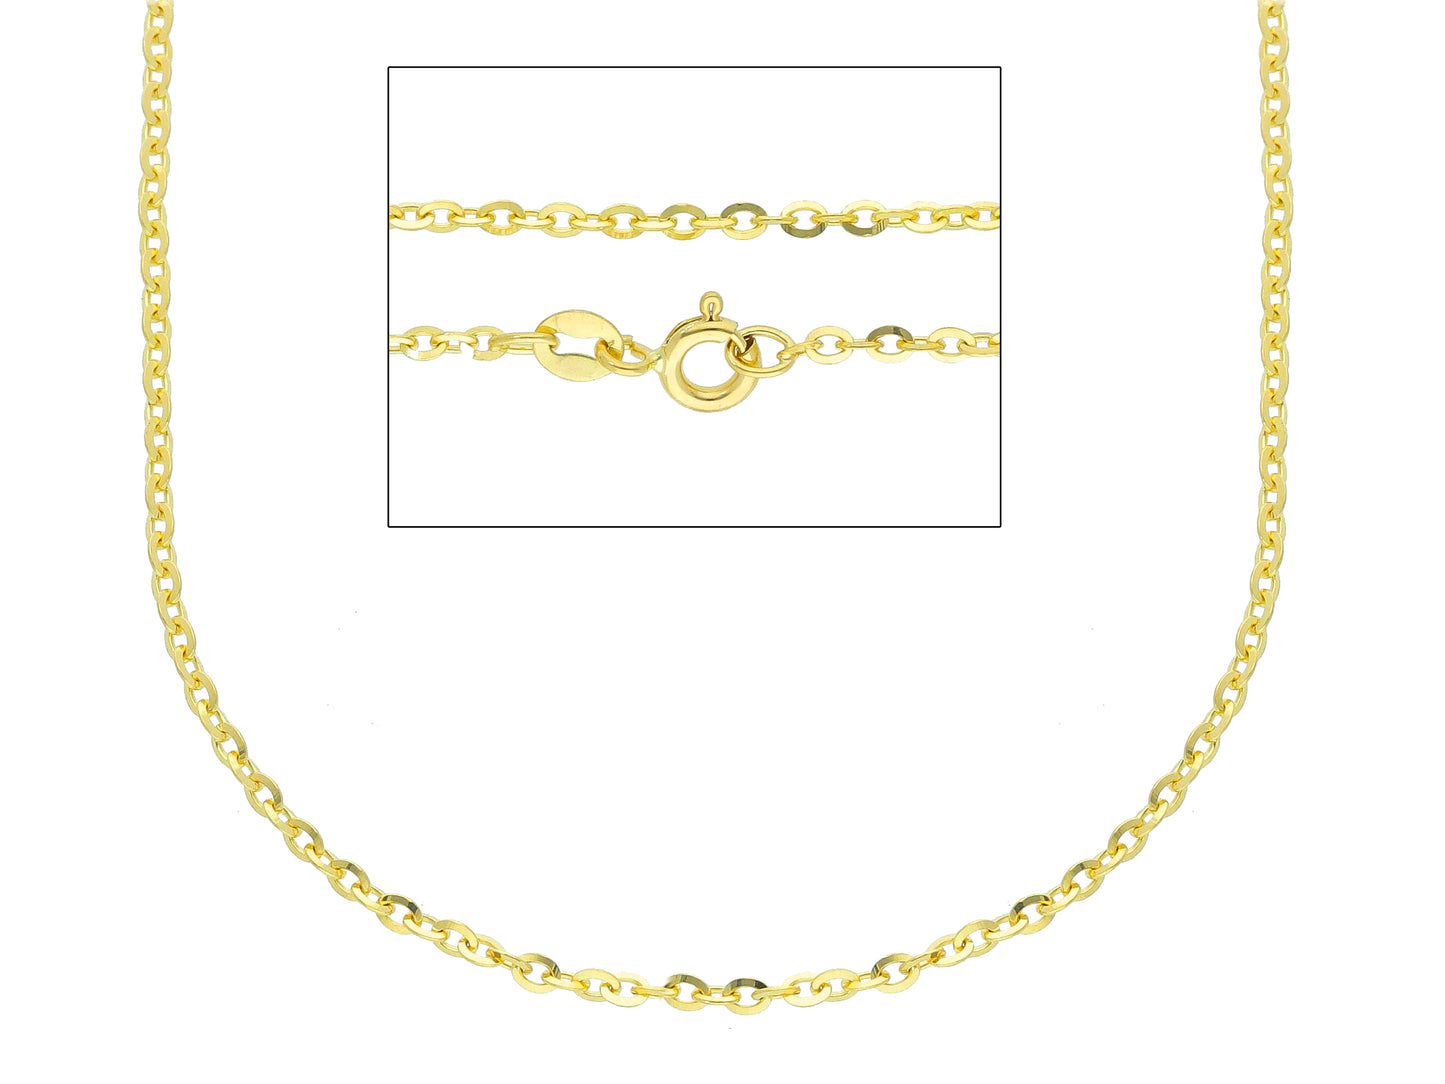 Rolo Style chain